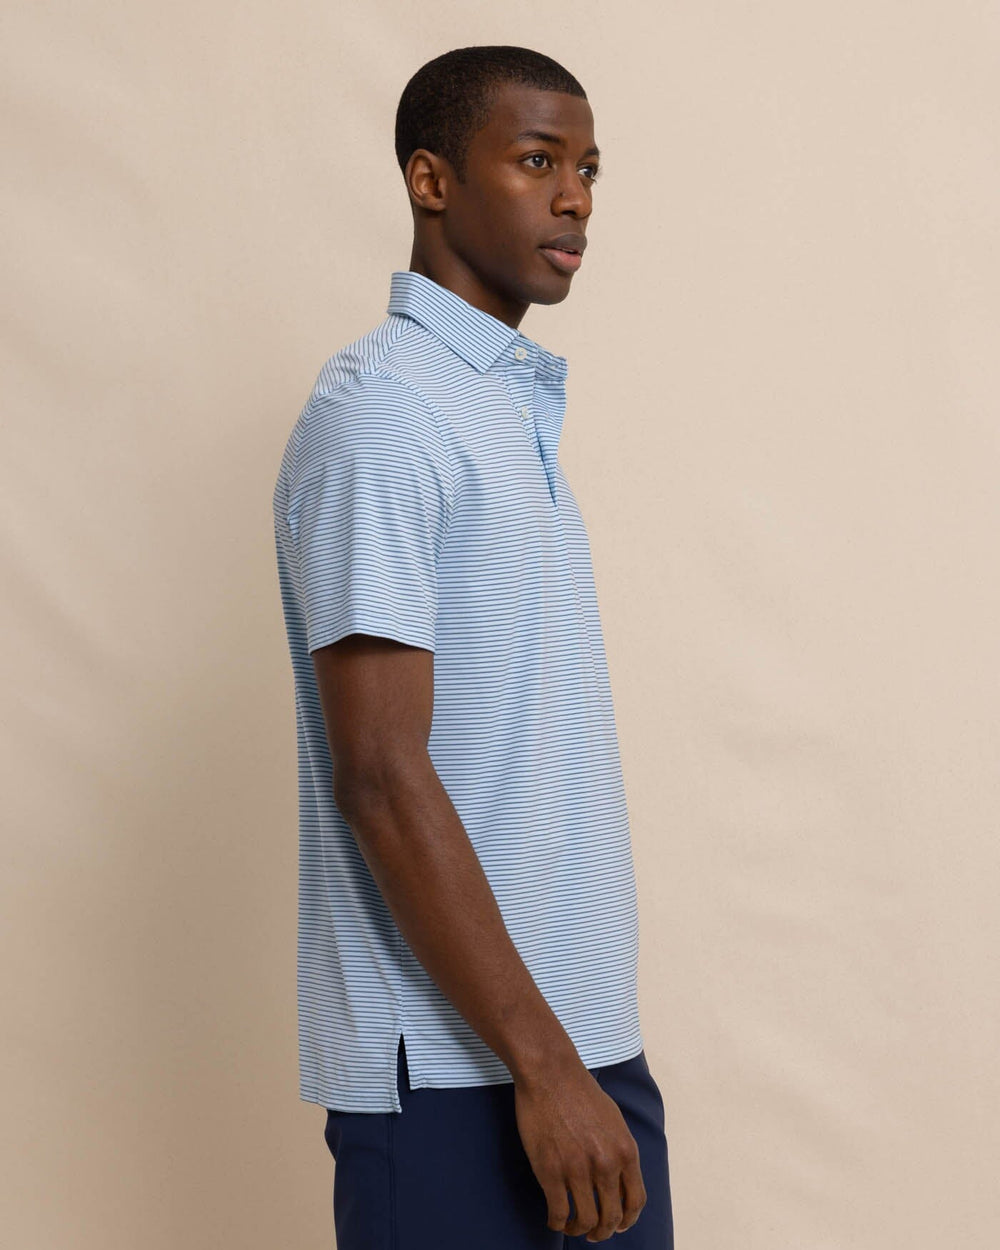 The front view of the Southern Tide brrr-eeze Baytop Stripe Performance Polo by Southern Tide - Clearwater Blue